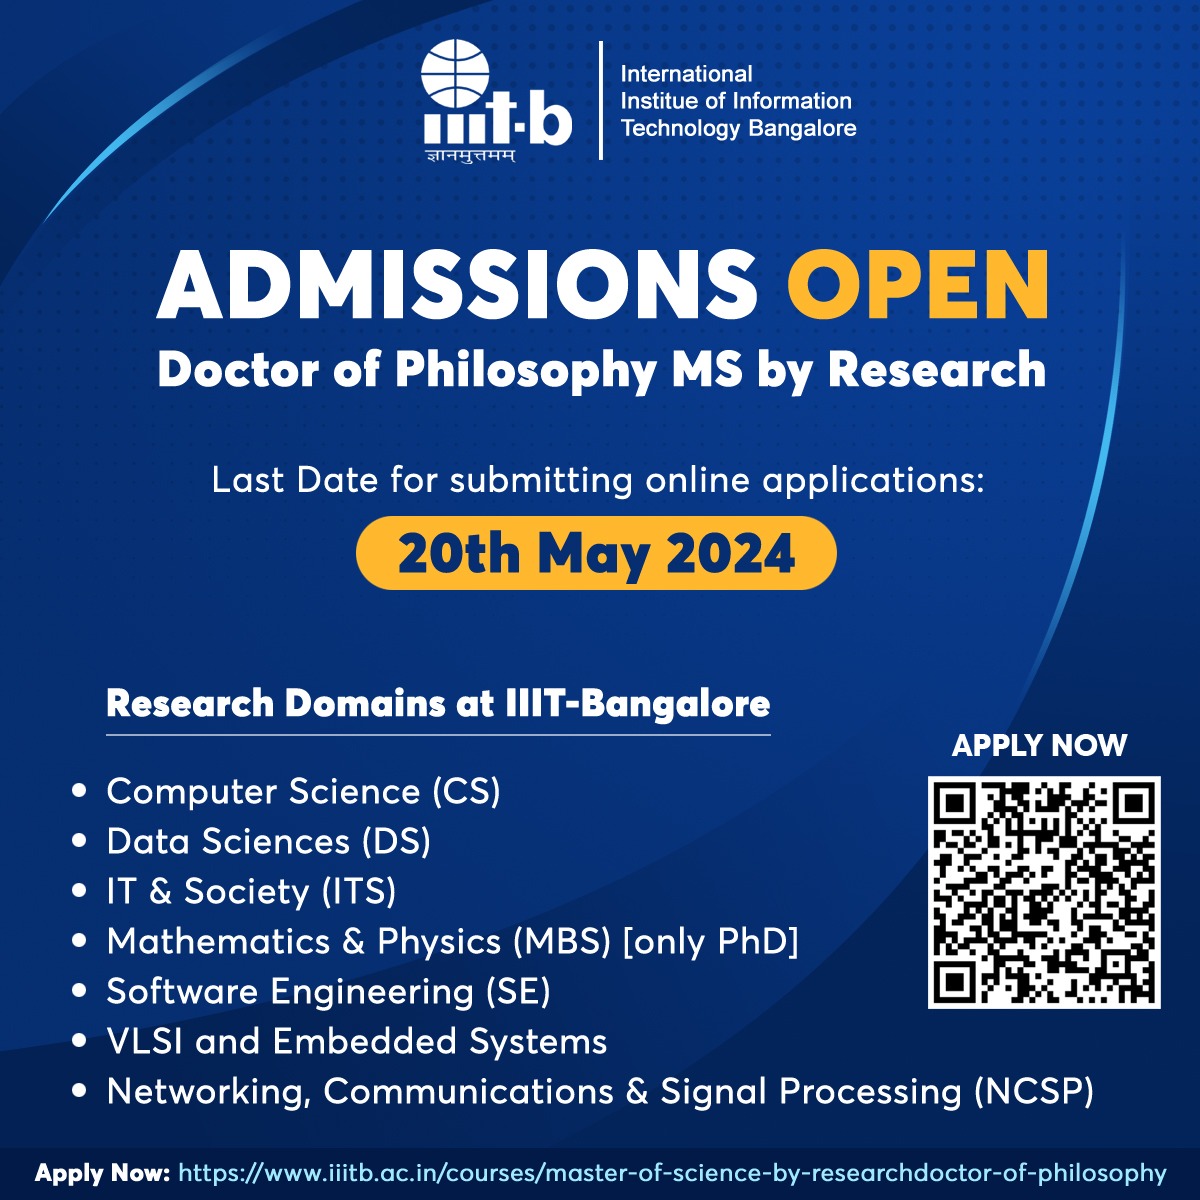 #AdmissionsOpen for Doctor of Philosophy and MS by Research Last Date for submitting online applications: May 20, 2024 Apply Now: iiitb.ac.in/courses/master… #IIITB #IIITBangalore #ResearchProgrammes #PhD #MSByResearch